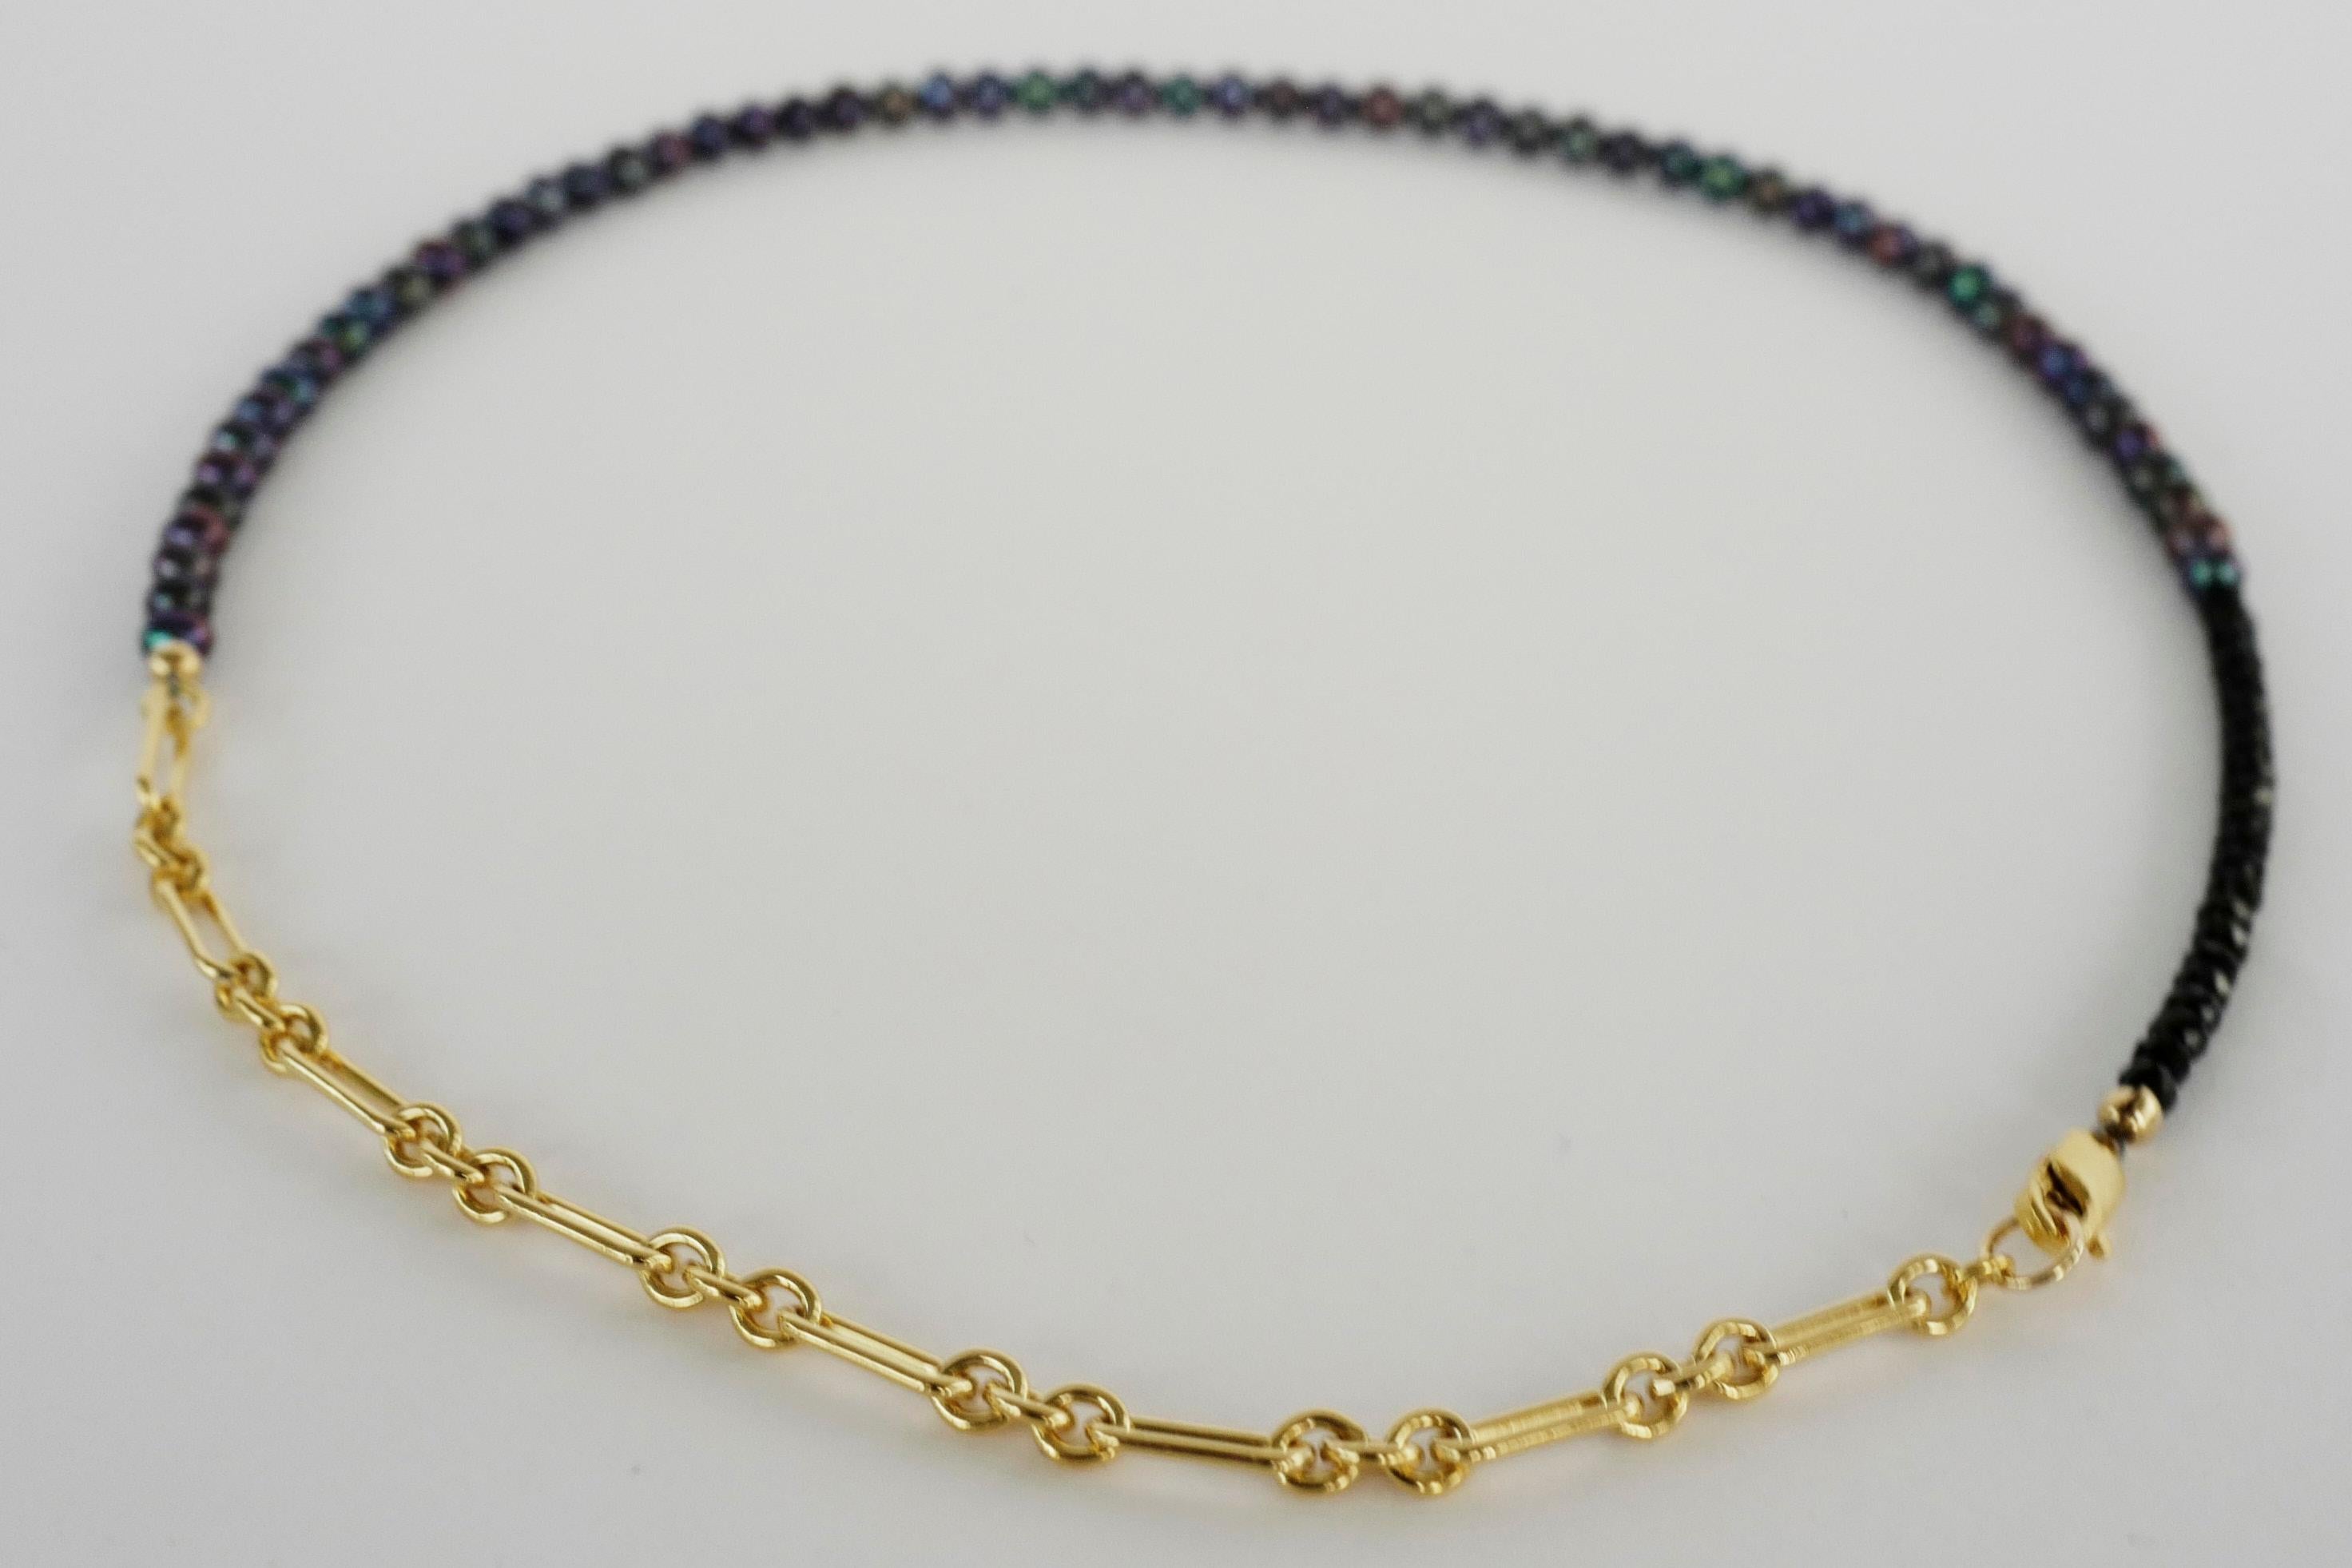 Women's Black Pearl Beaded Choker Necklace Black Spinel Gold Filled Chain J Dauphin For Sale